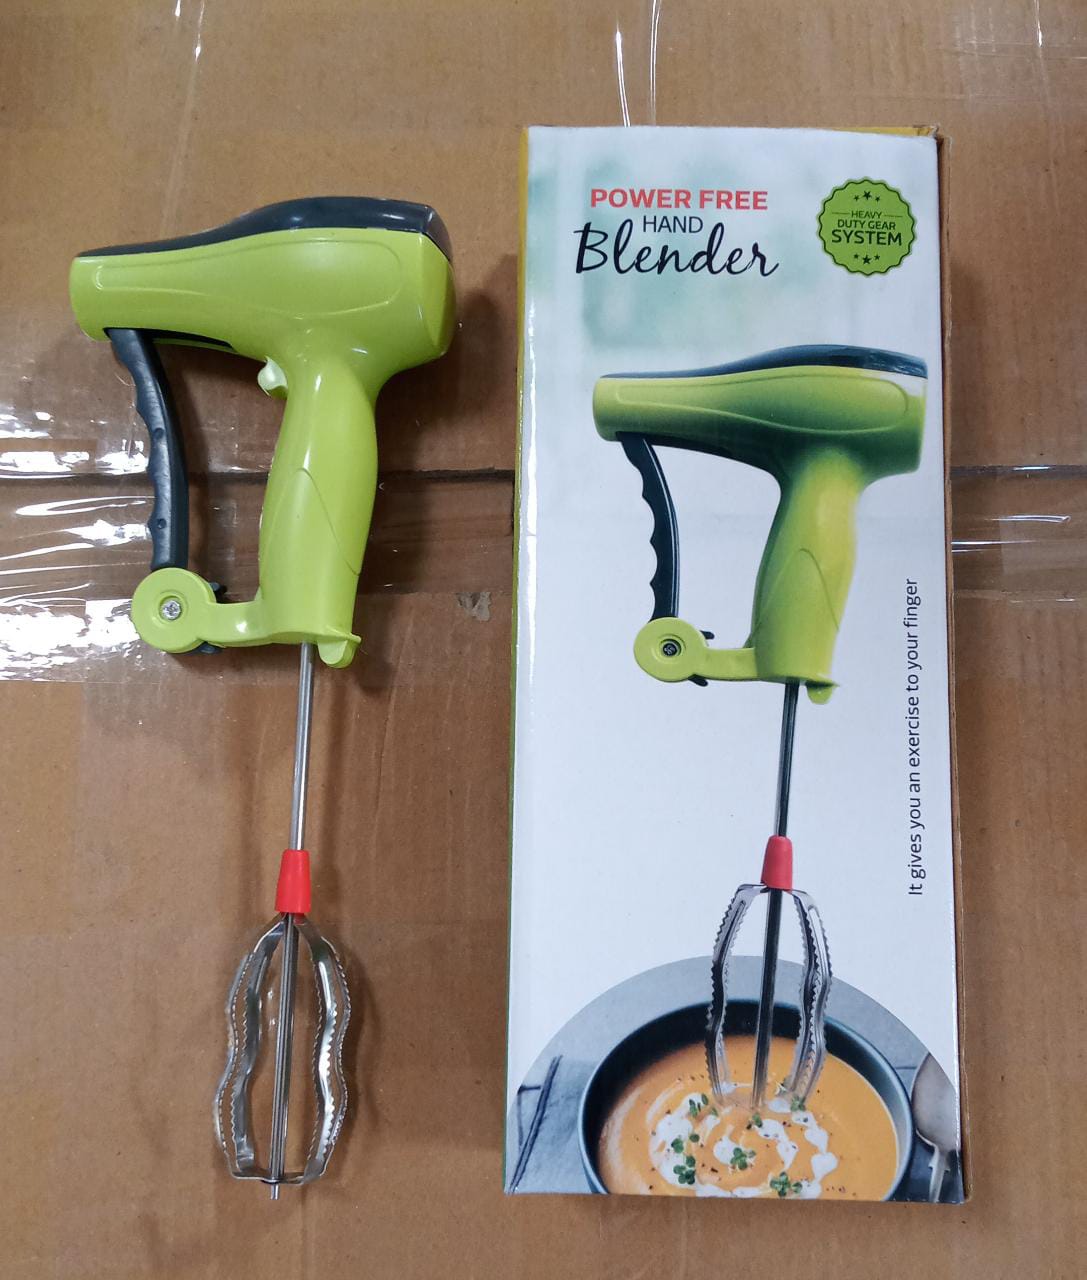 Power Free Manual Hand Blender with Stainless Steel Blades, Milk Lassi Maker, Egg Beater Mixer Rawai